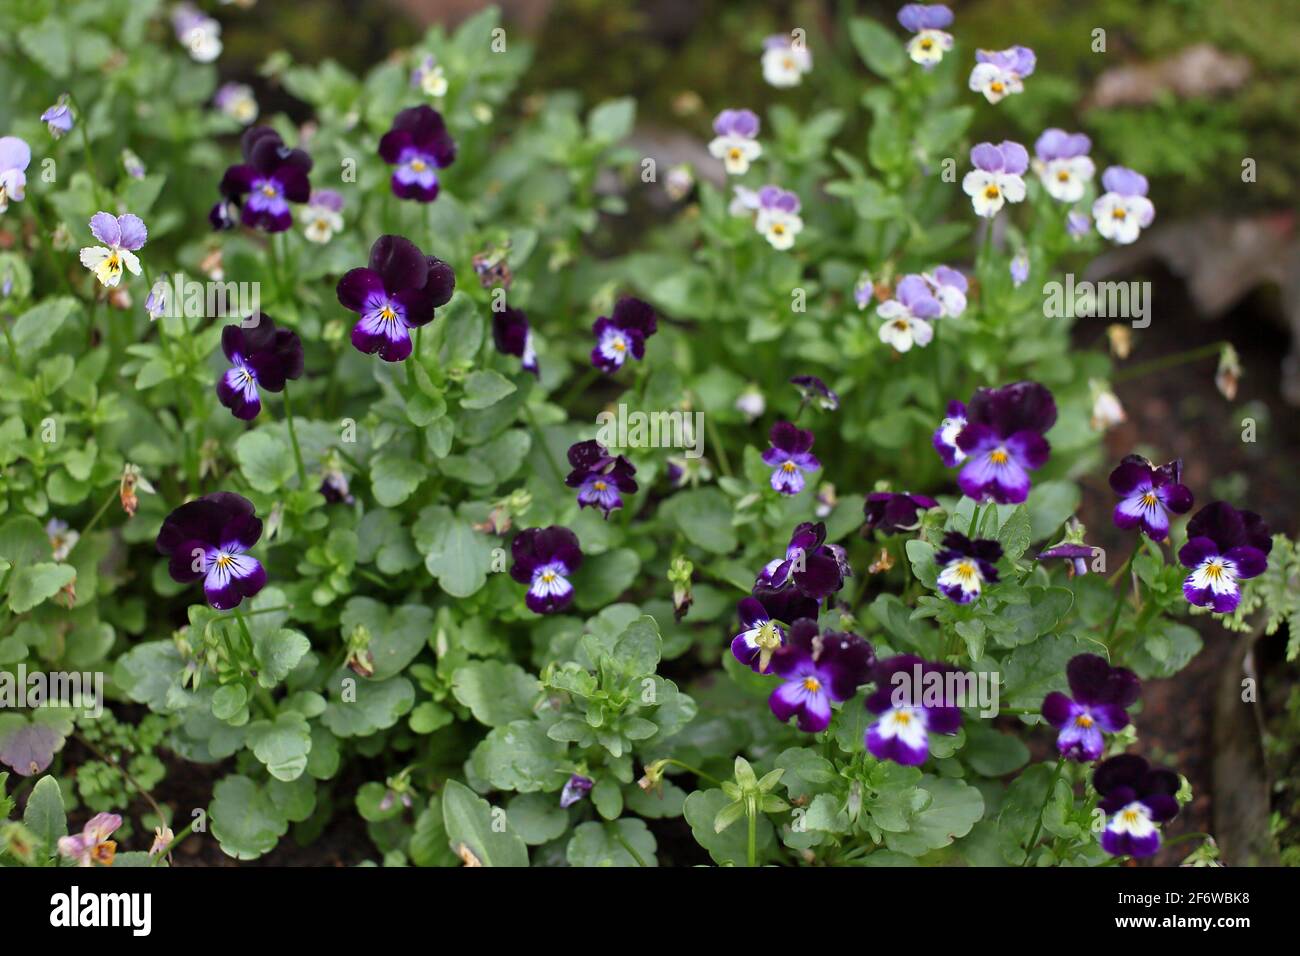 Garden pansy, a wildflower of europe and western asia Stock Photo